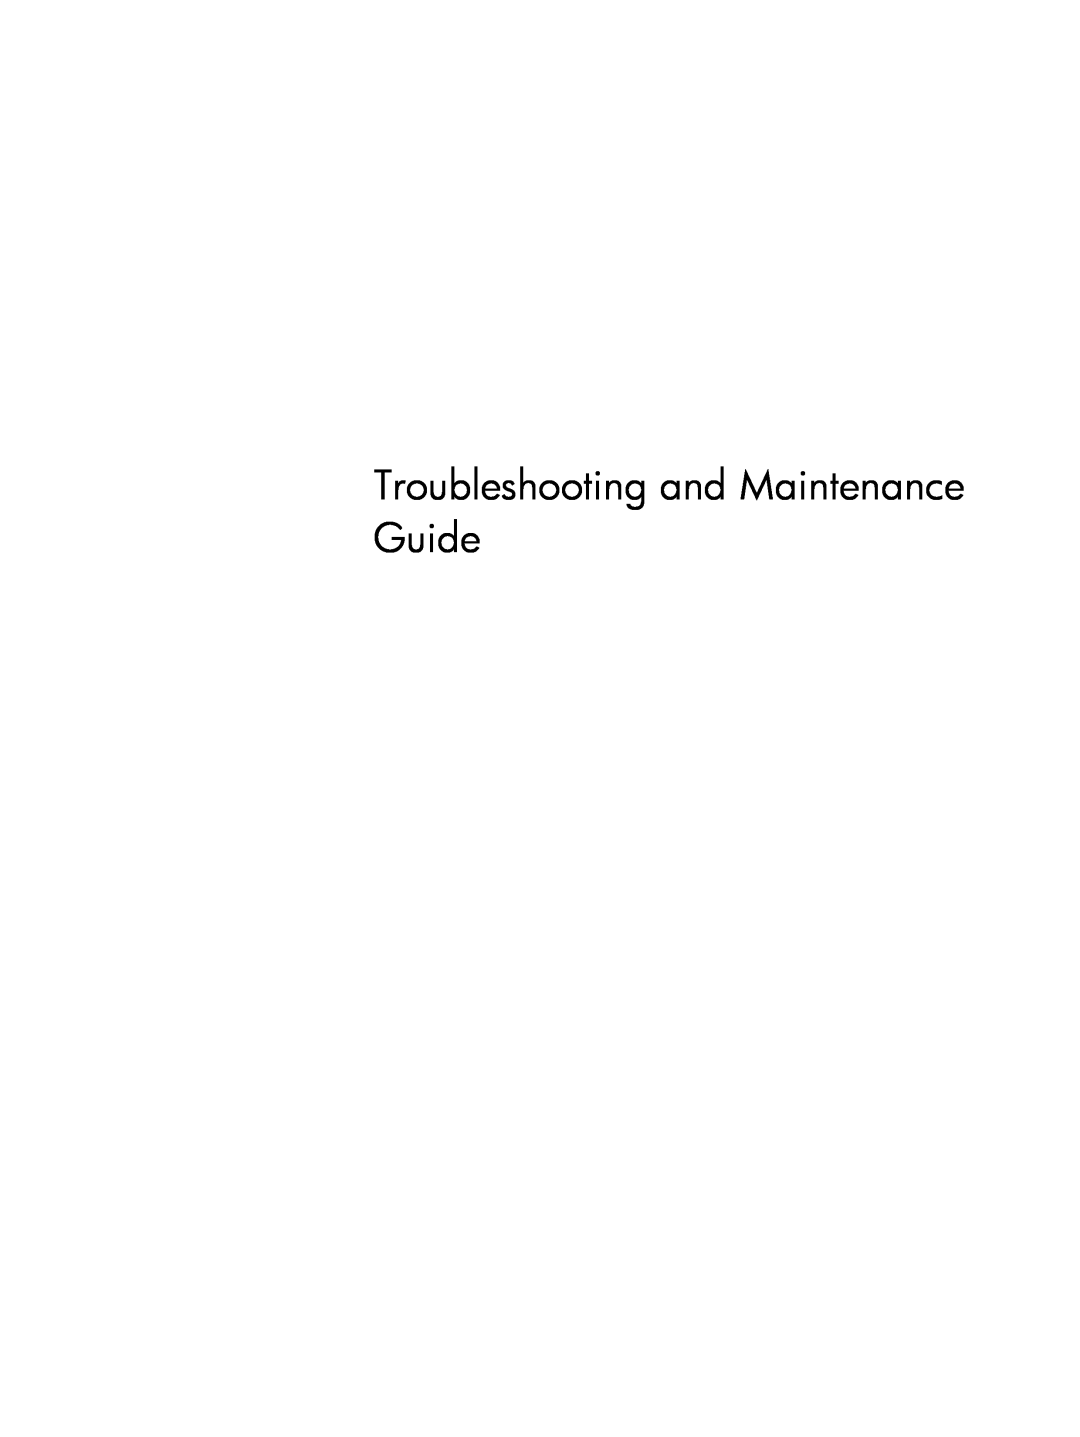 HP 23-c159, 23-c210xt, 23-c130, 23-c115xt, 23-c059, 23-c050, 23-c030, 23-c010xt manual Troubleshooting and Maintenance Guide 